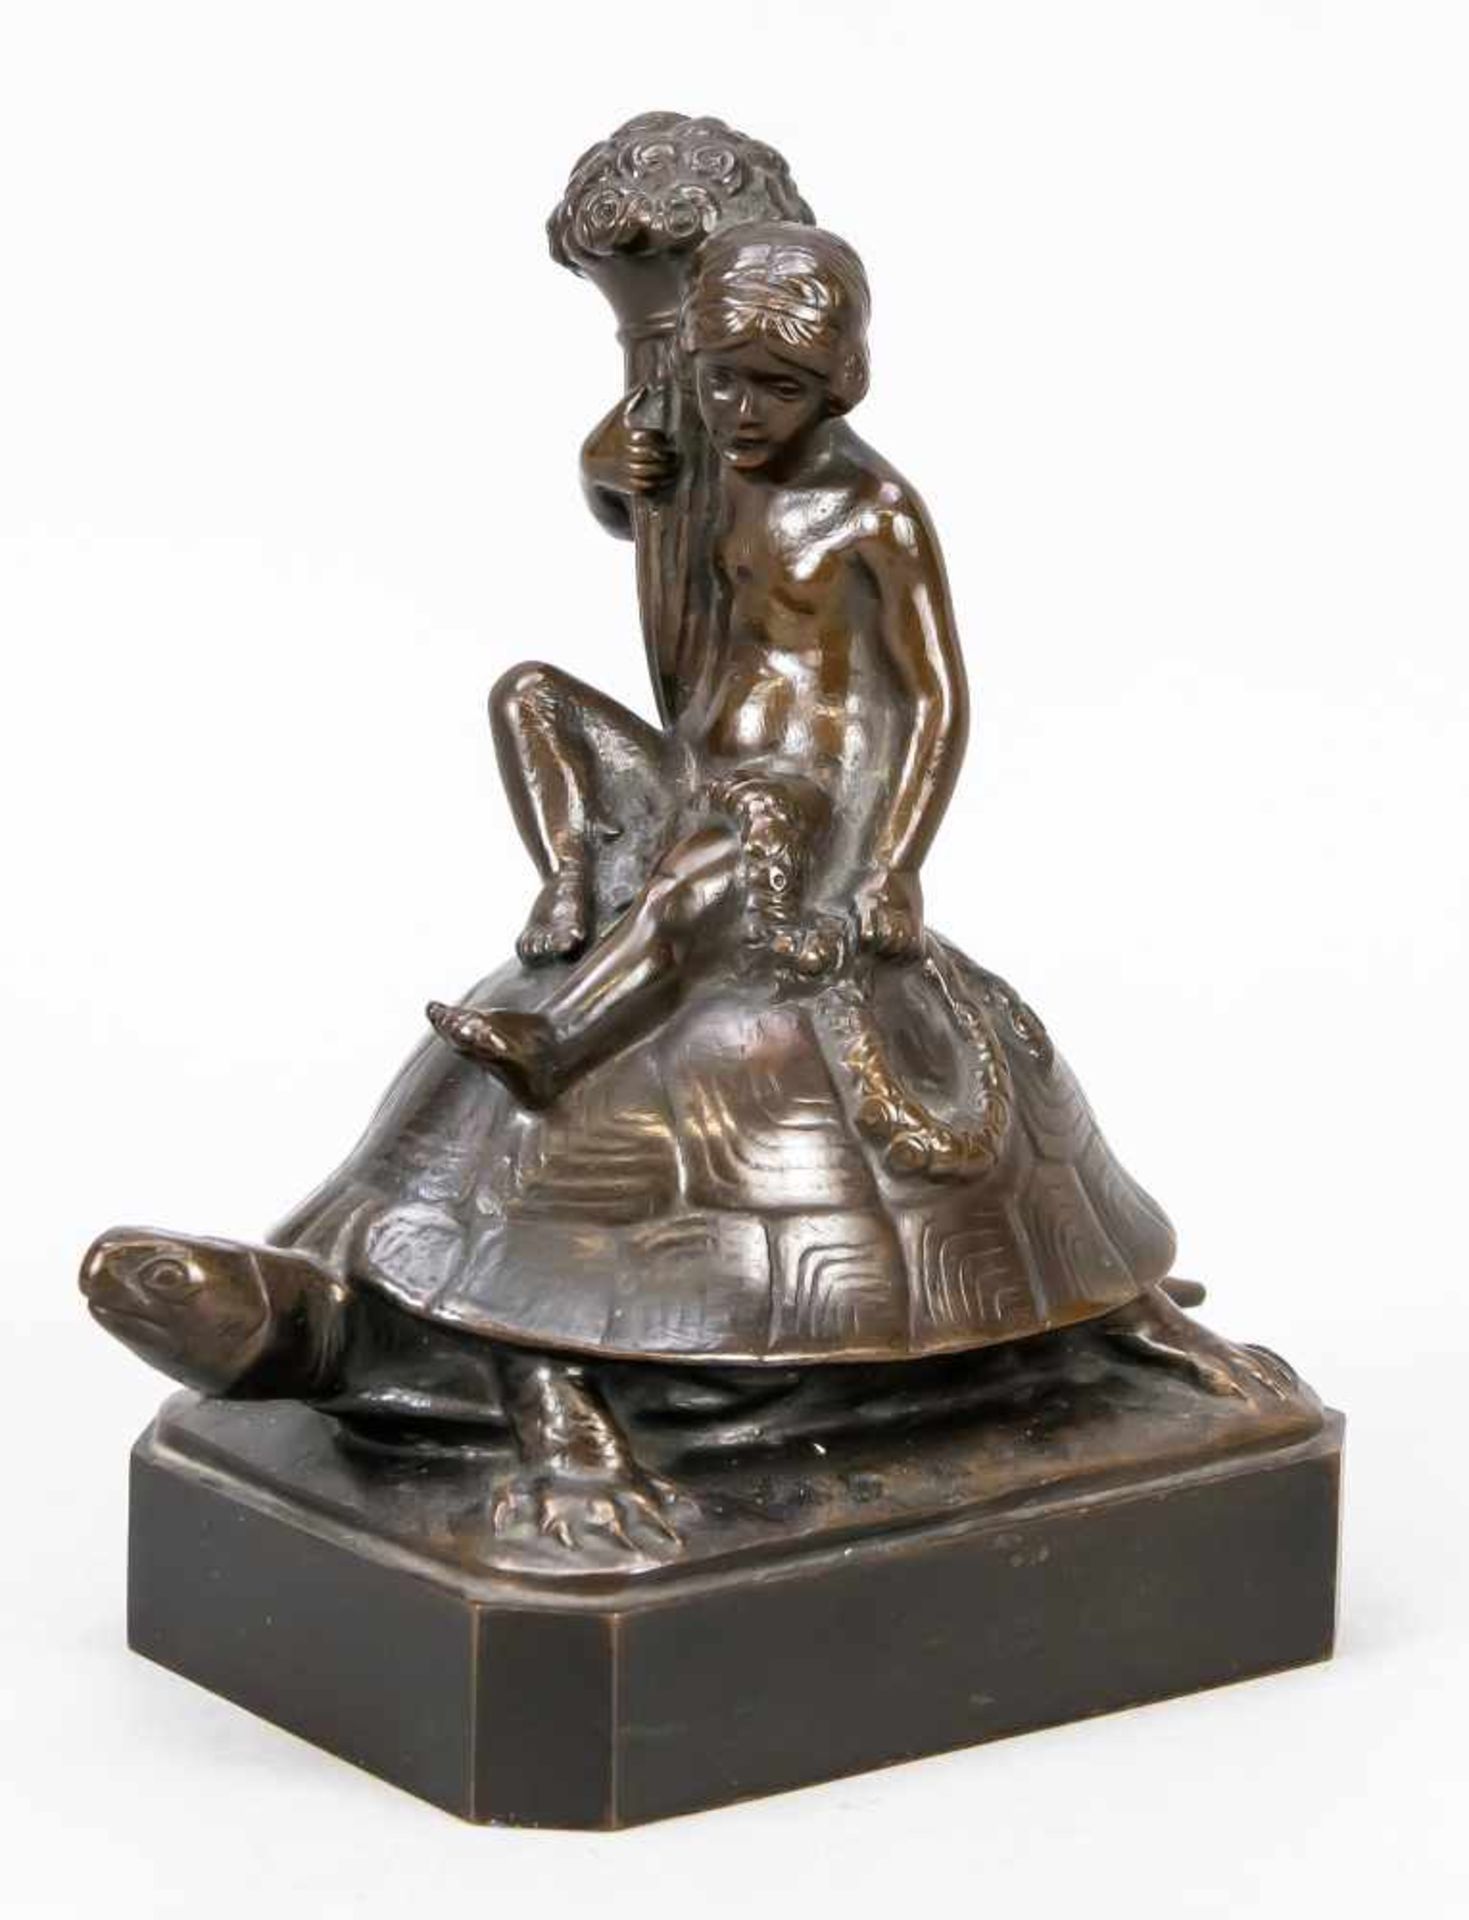 C. Bull, sculptor around 1900, girl on turtle, bronze dark brown patinated, signed,foundry stamp